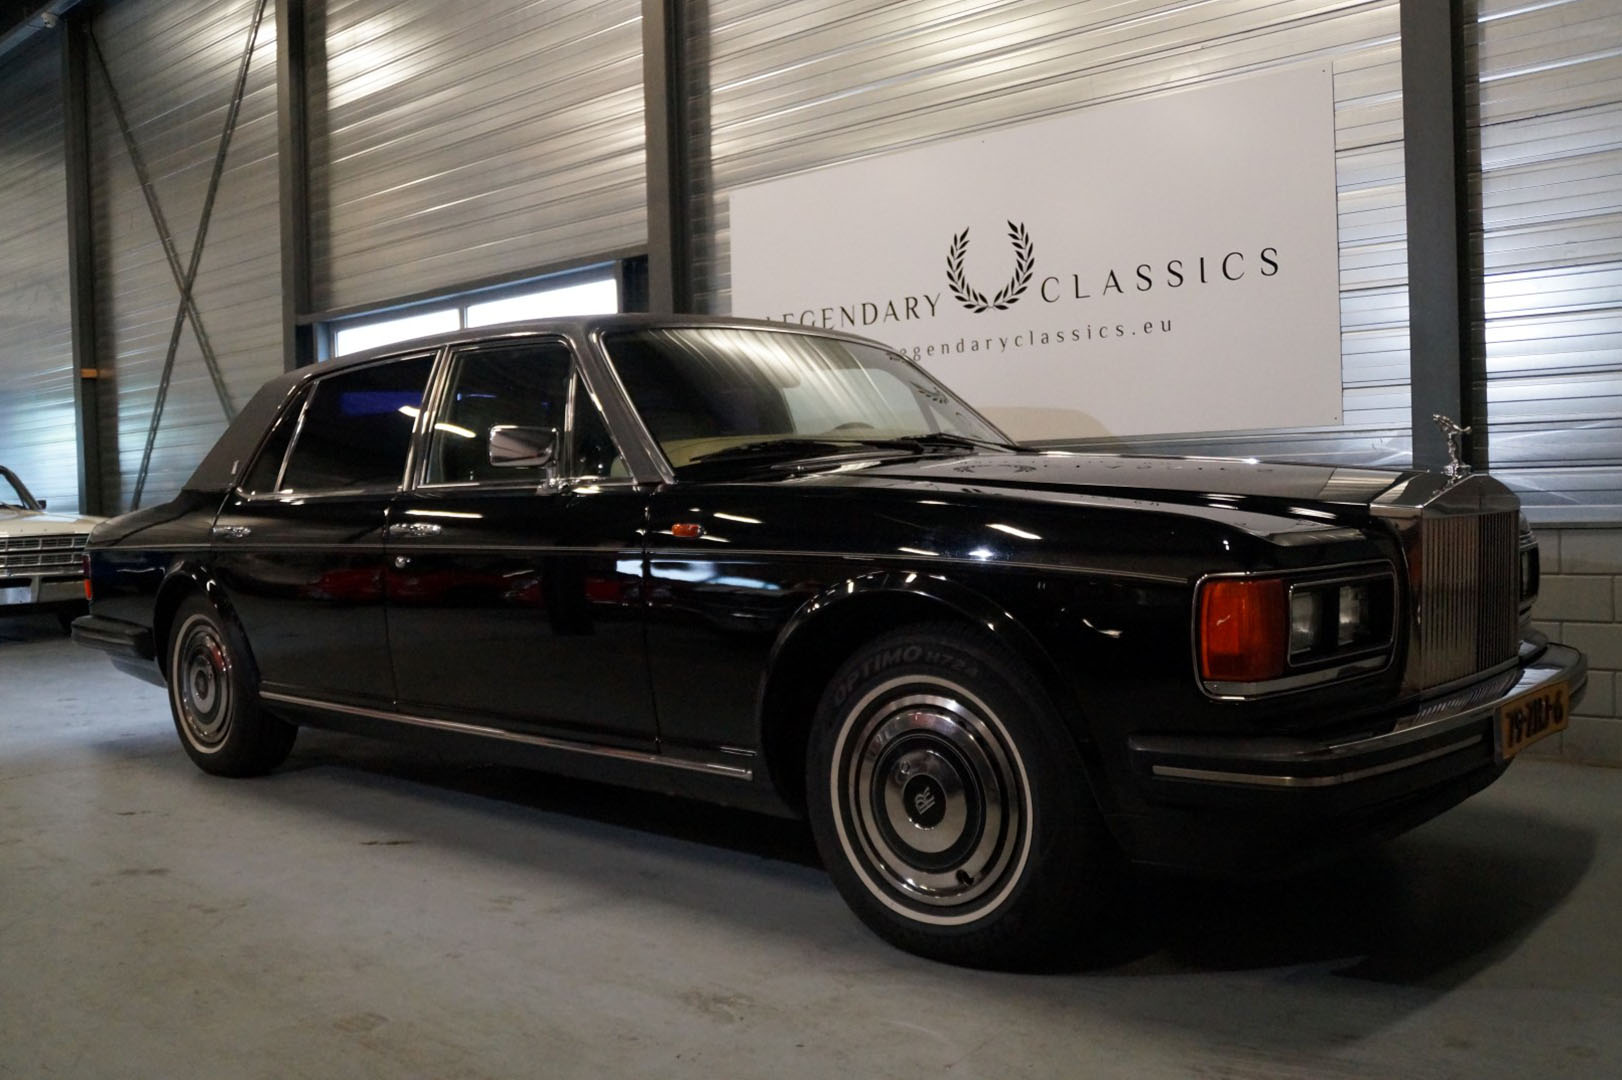 Buy this Rolls Royce silver spur   at Legendary Classics